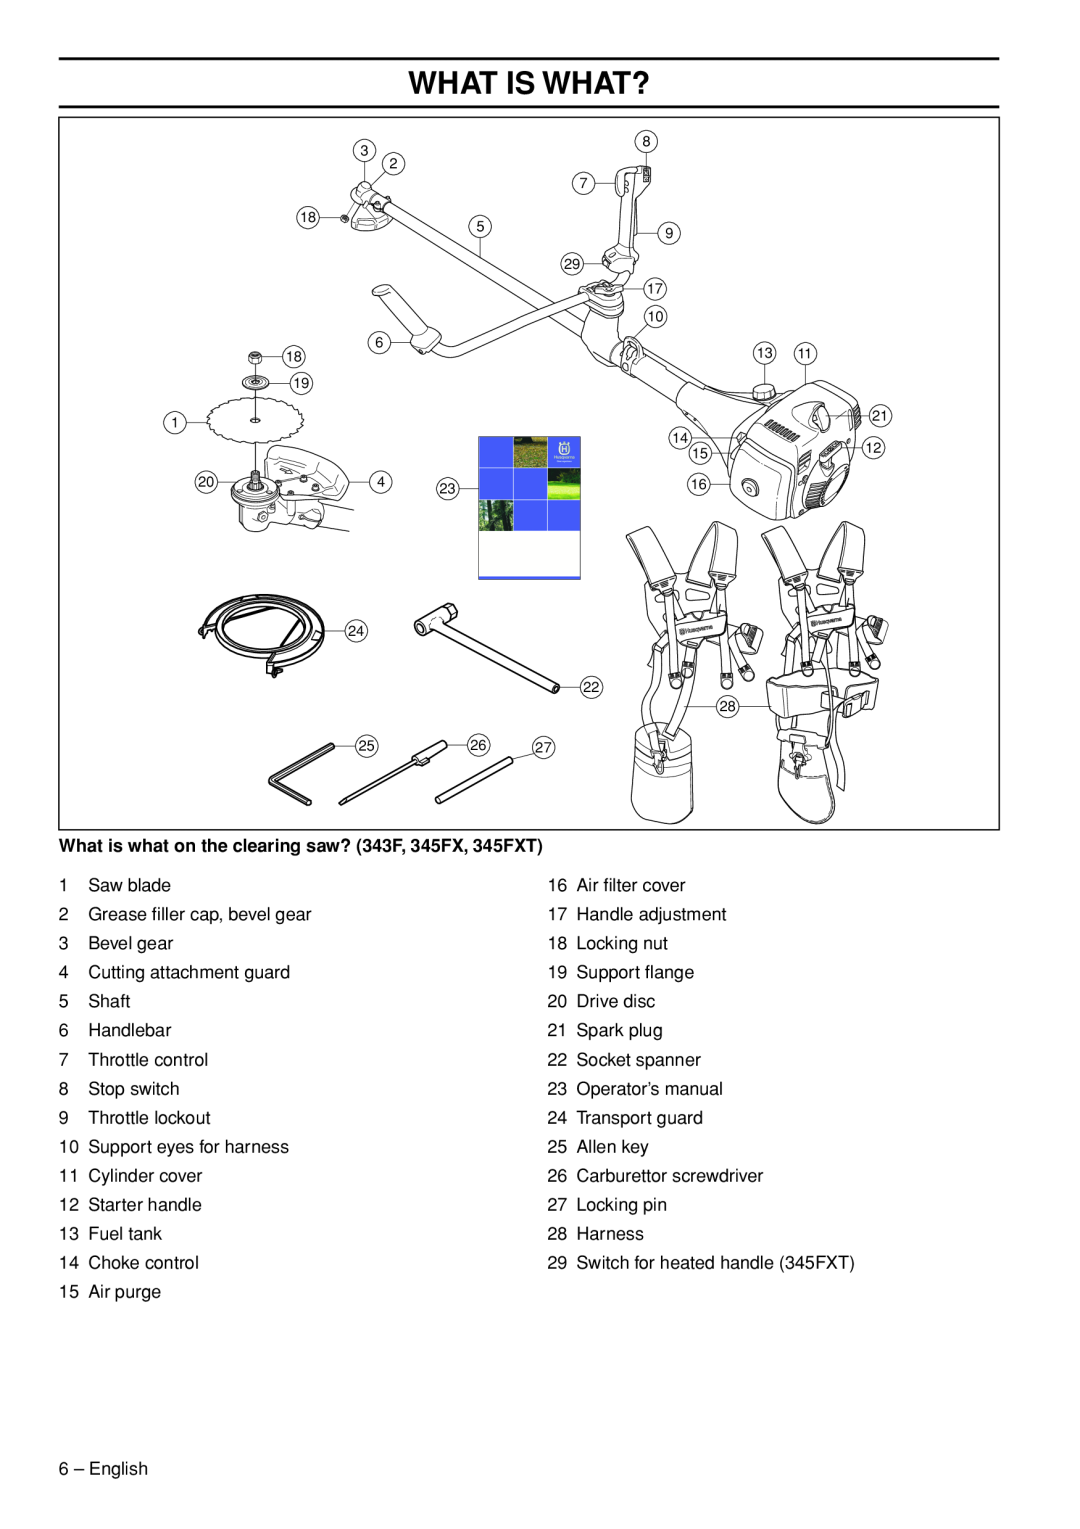 Husqvarna 335LX manual What is what on the clearing saw? 343F, 345FX, 345FXT, What Is What? 